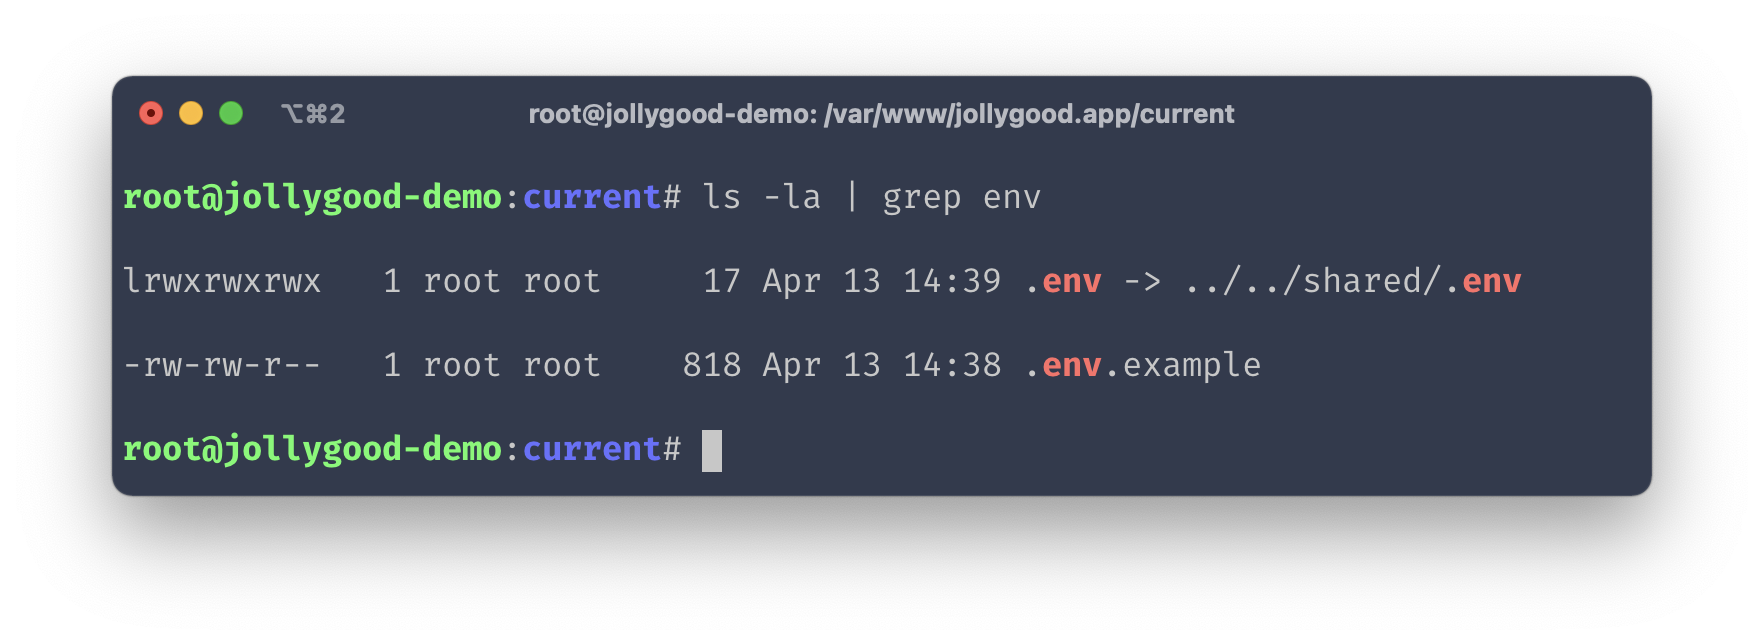 Terminal output of the "ls -la | grep env" command on the server. It shows that the ".env" file is a symlink to "../../shared/.env".